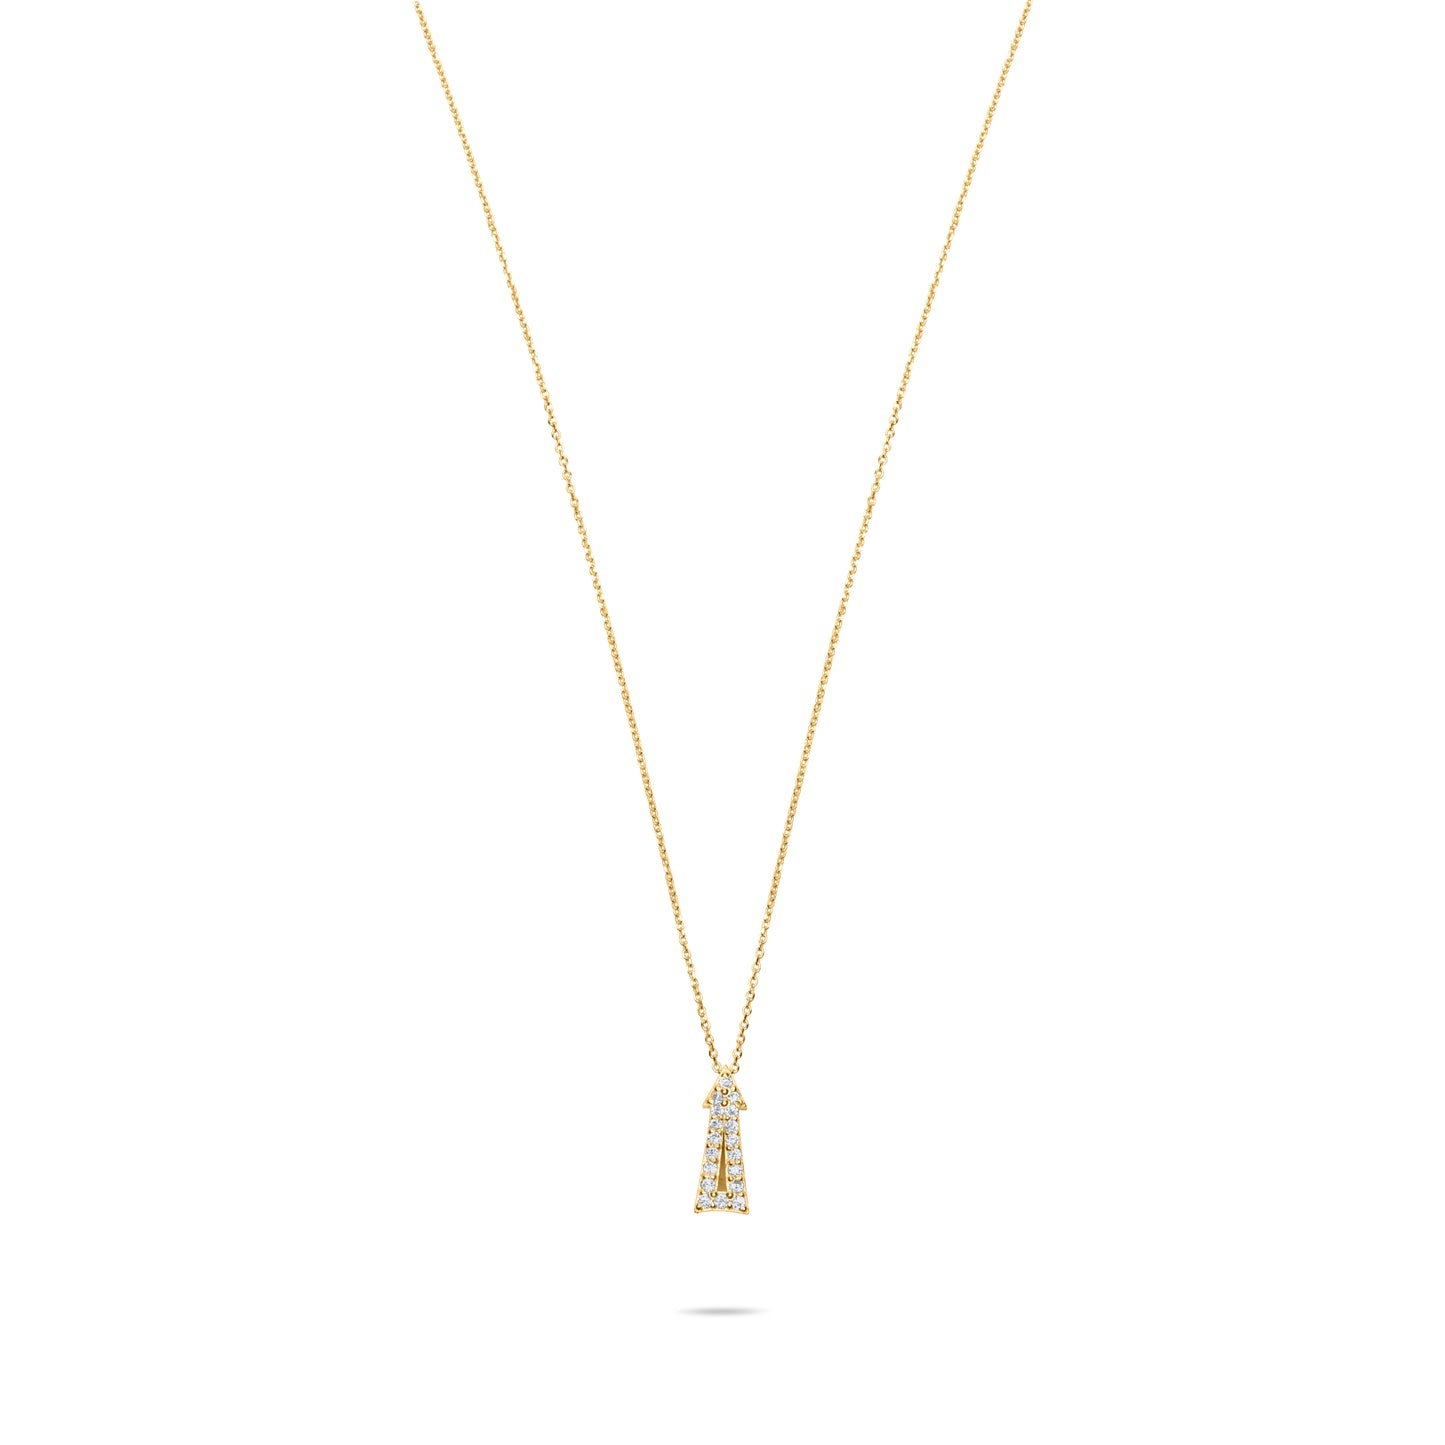 3D Arrow Necklace - Gold Plated